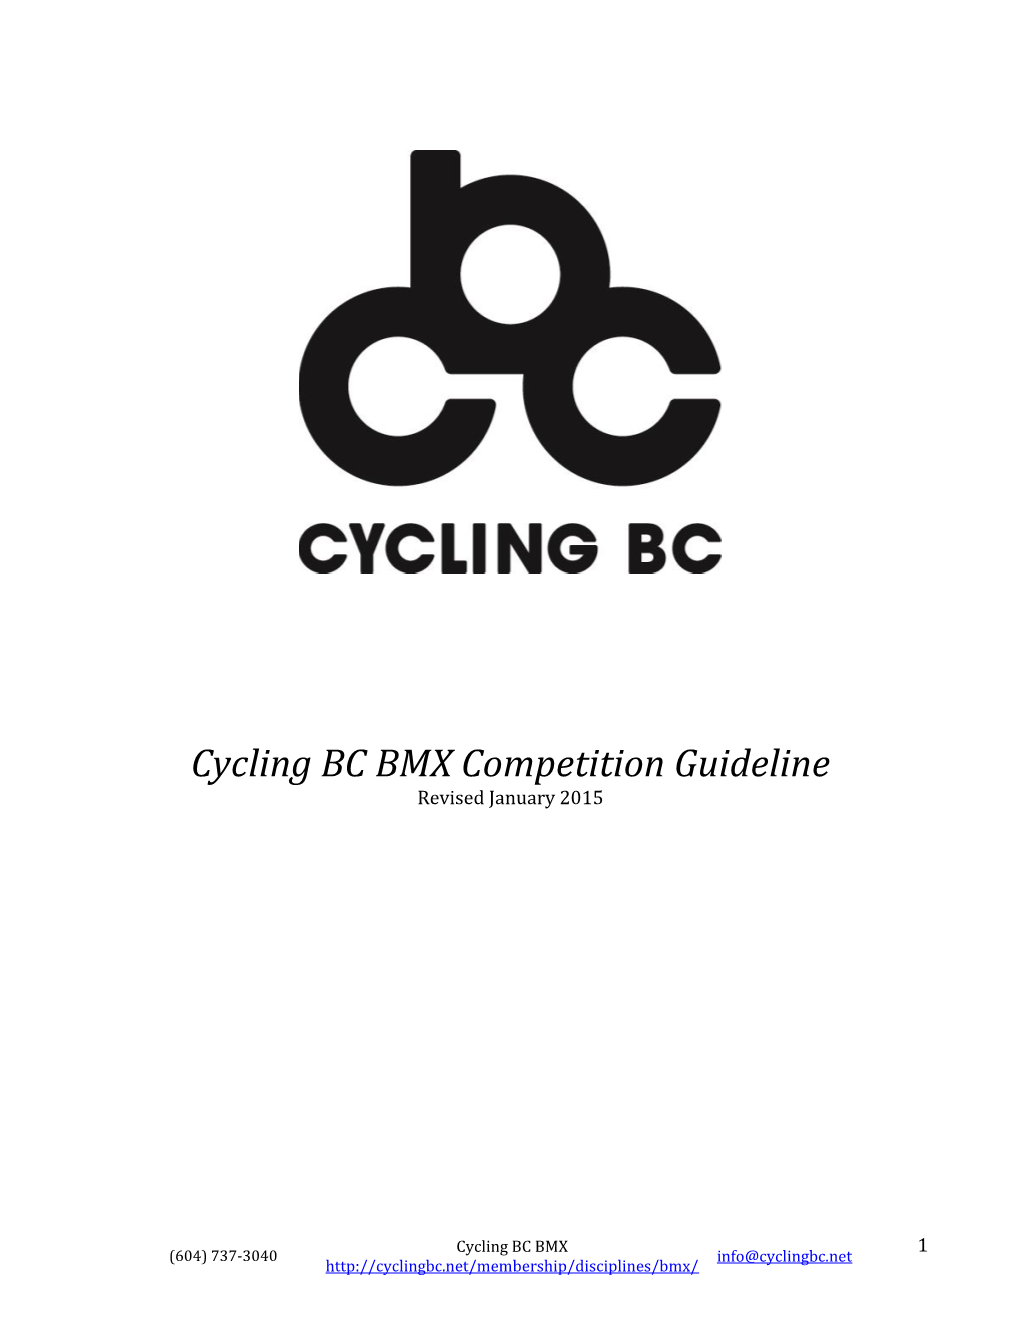 Cycling BC BMX Competition Guideline Revised January 2015